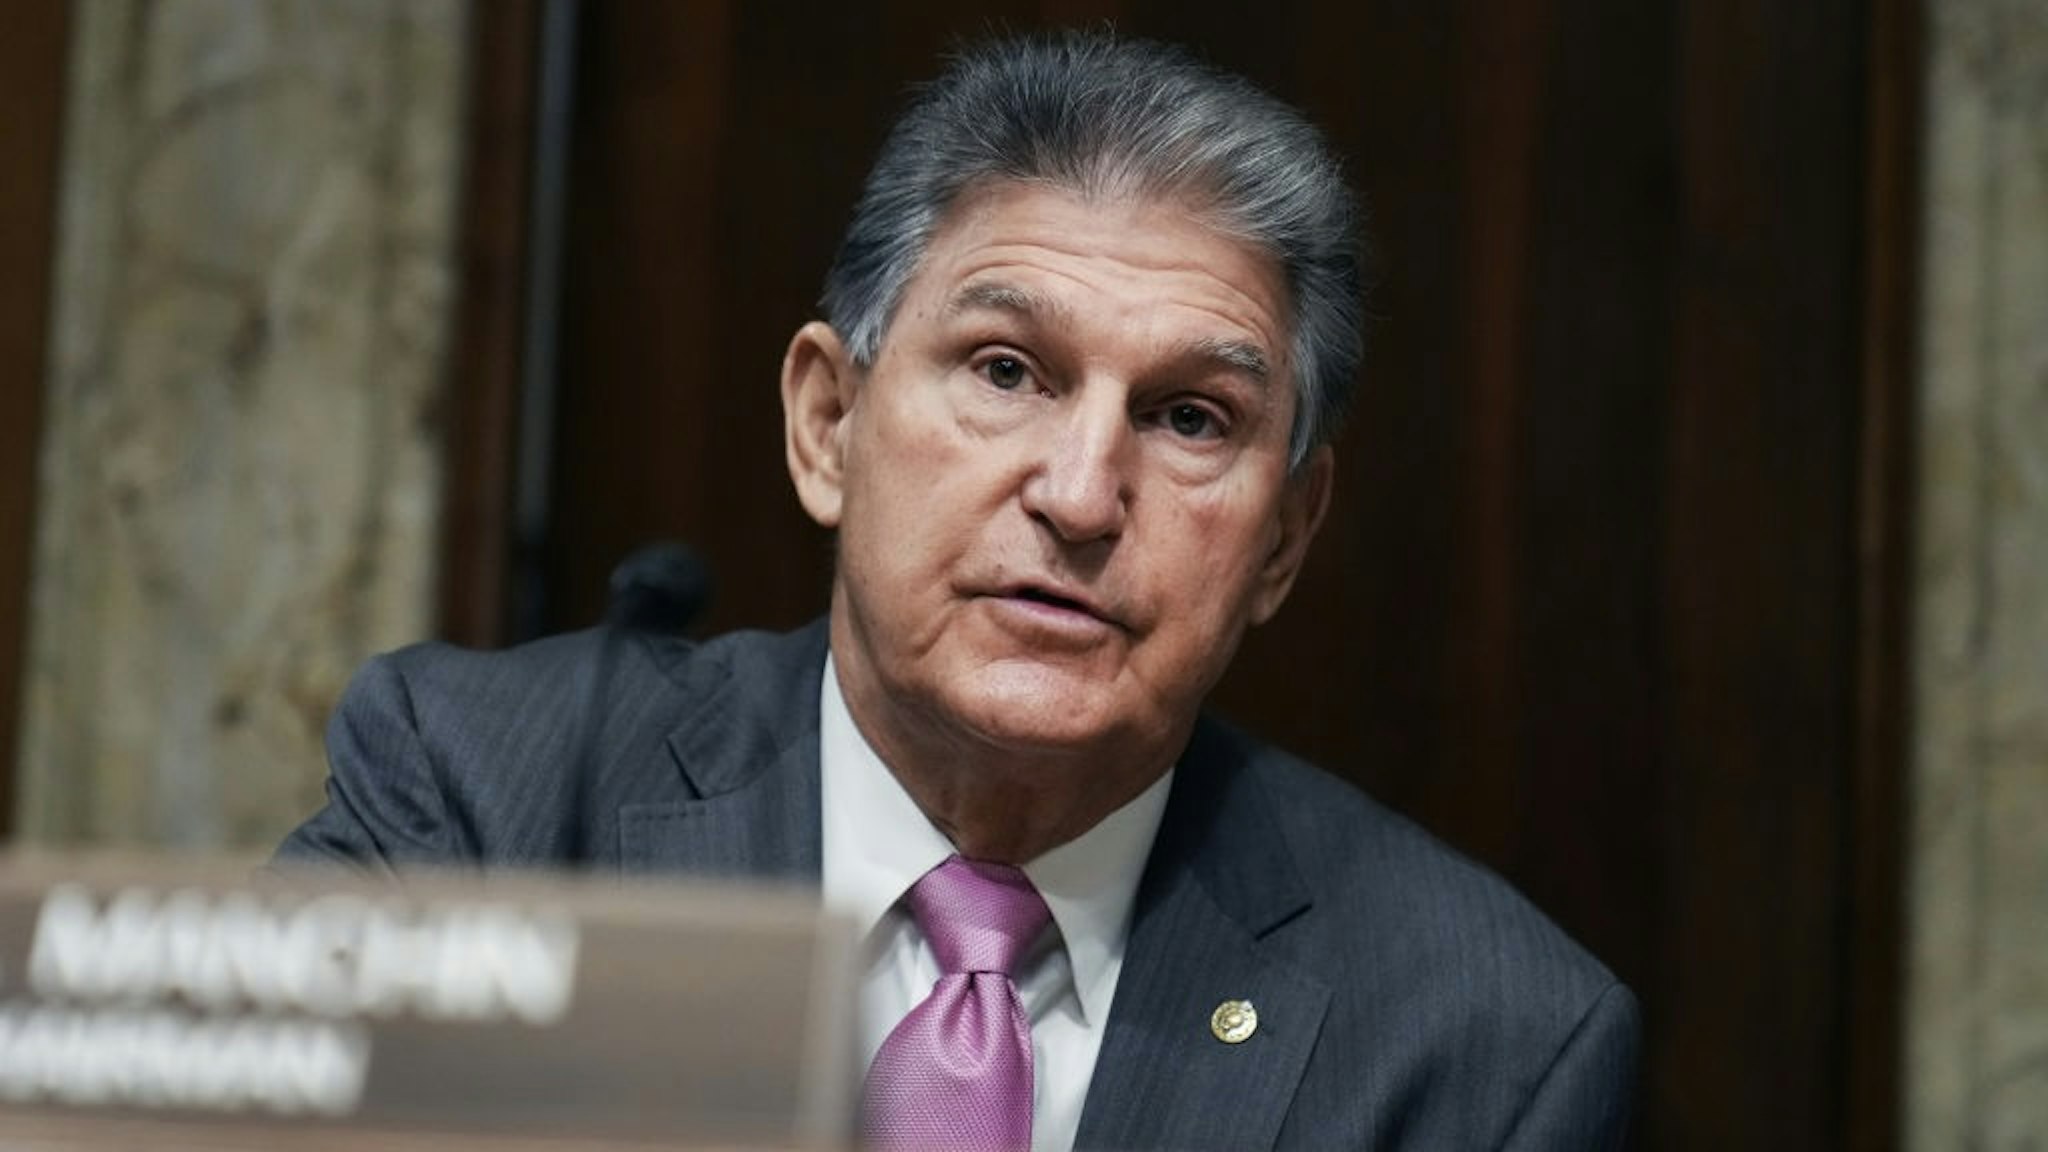 Manchin at Senate Energy and Natural Resources Committee UNITED STATES - NOVEMBER 02: Chairman Joe Manchin, D-W.Va., arrives for a Senate Energy and Natural Resources Committee markup on nominations in Dirksen Building on Tuesday, November 2, 2021. (Photo By Tom Williams/CQ-Roll Call, Inc via Getty Images) Tom Williams / Contributor